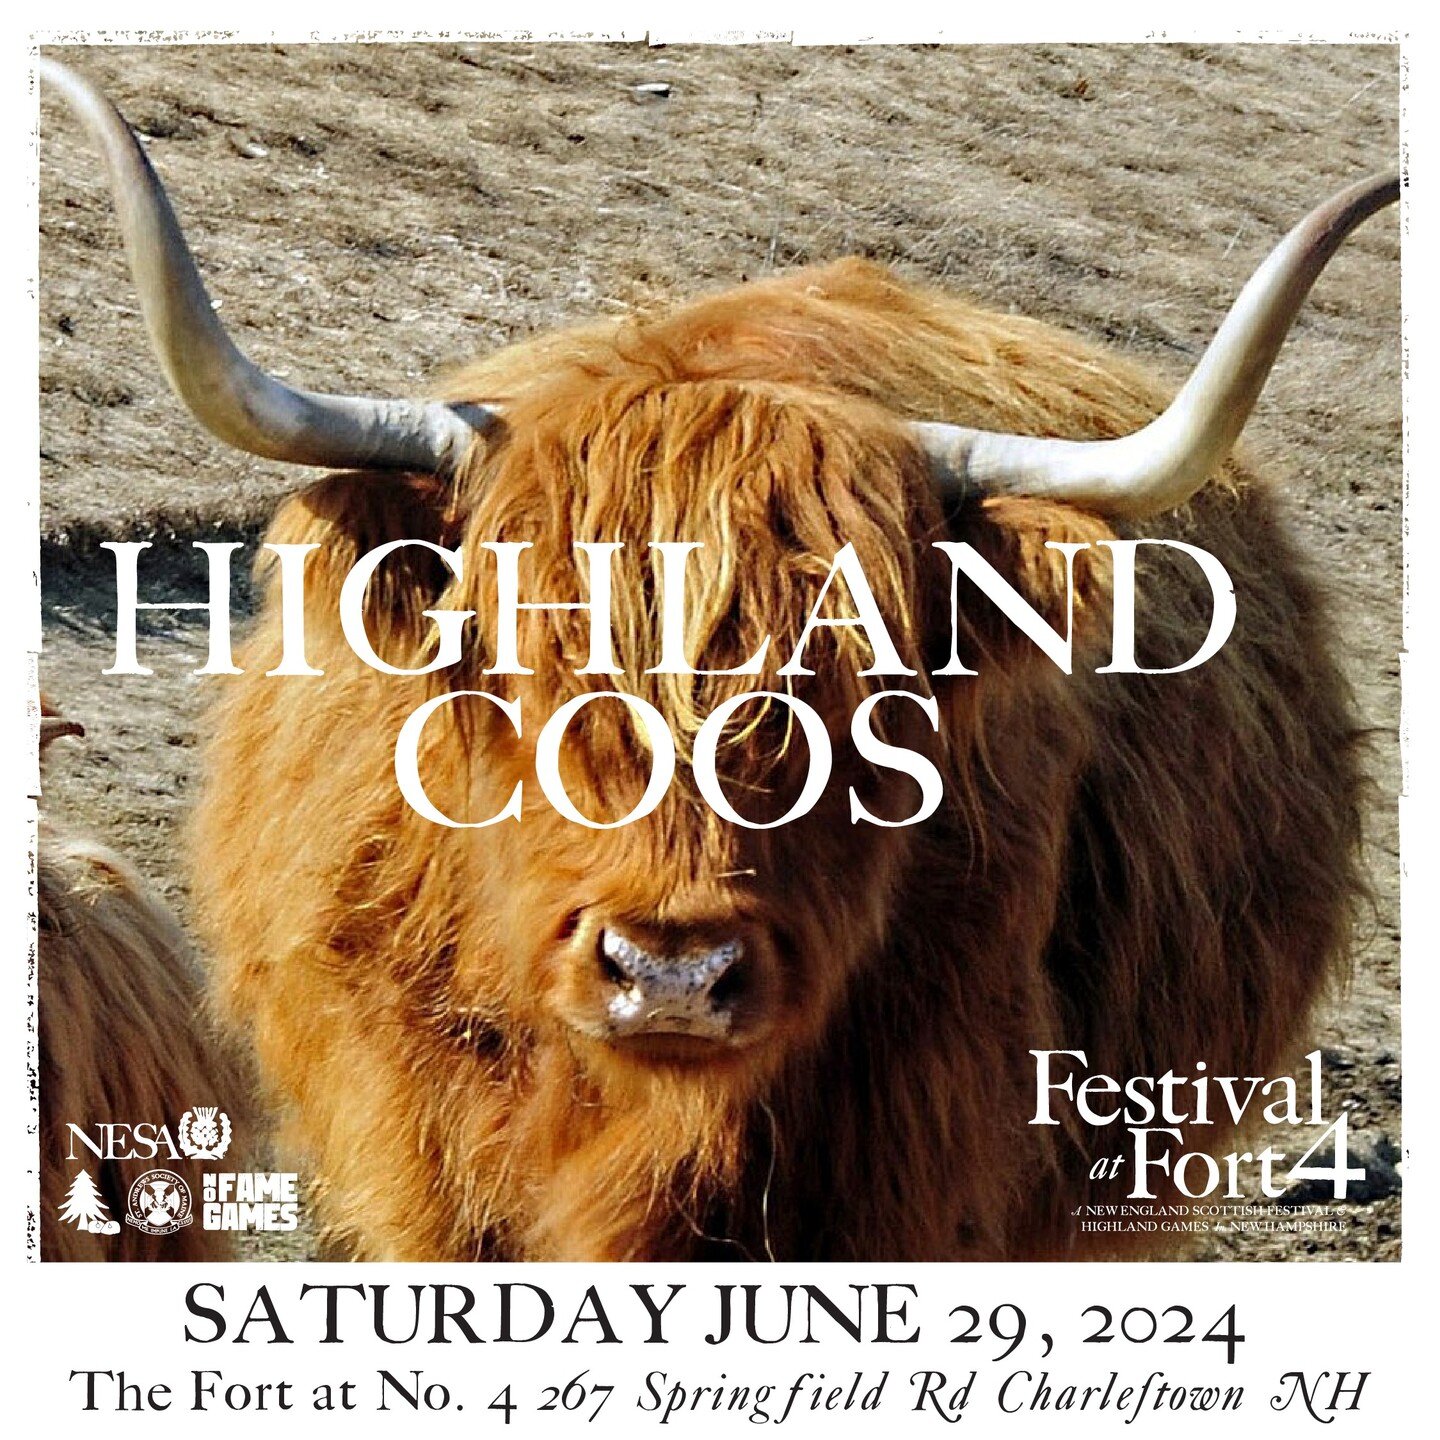 Come see everyone's favorite #highlandcoos at The Festival at Fort 4 on June 29th, 2024. 
Get your tickets today!
#highlandgames #festivalatfort4 #highlandcows #highlandcows🐮 #highlandcowsofinstagram🐂 #highlandcowsofinstagram #stonelifting #pipesan